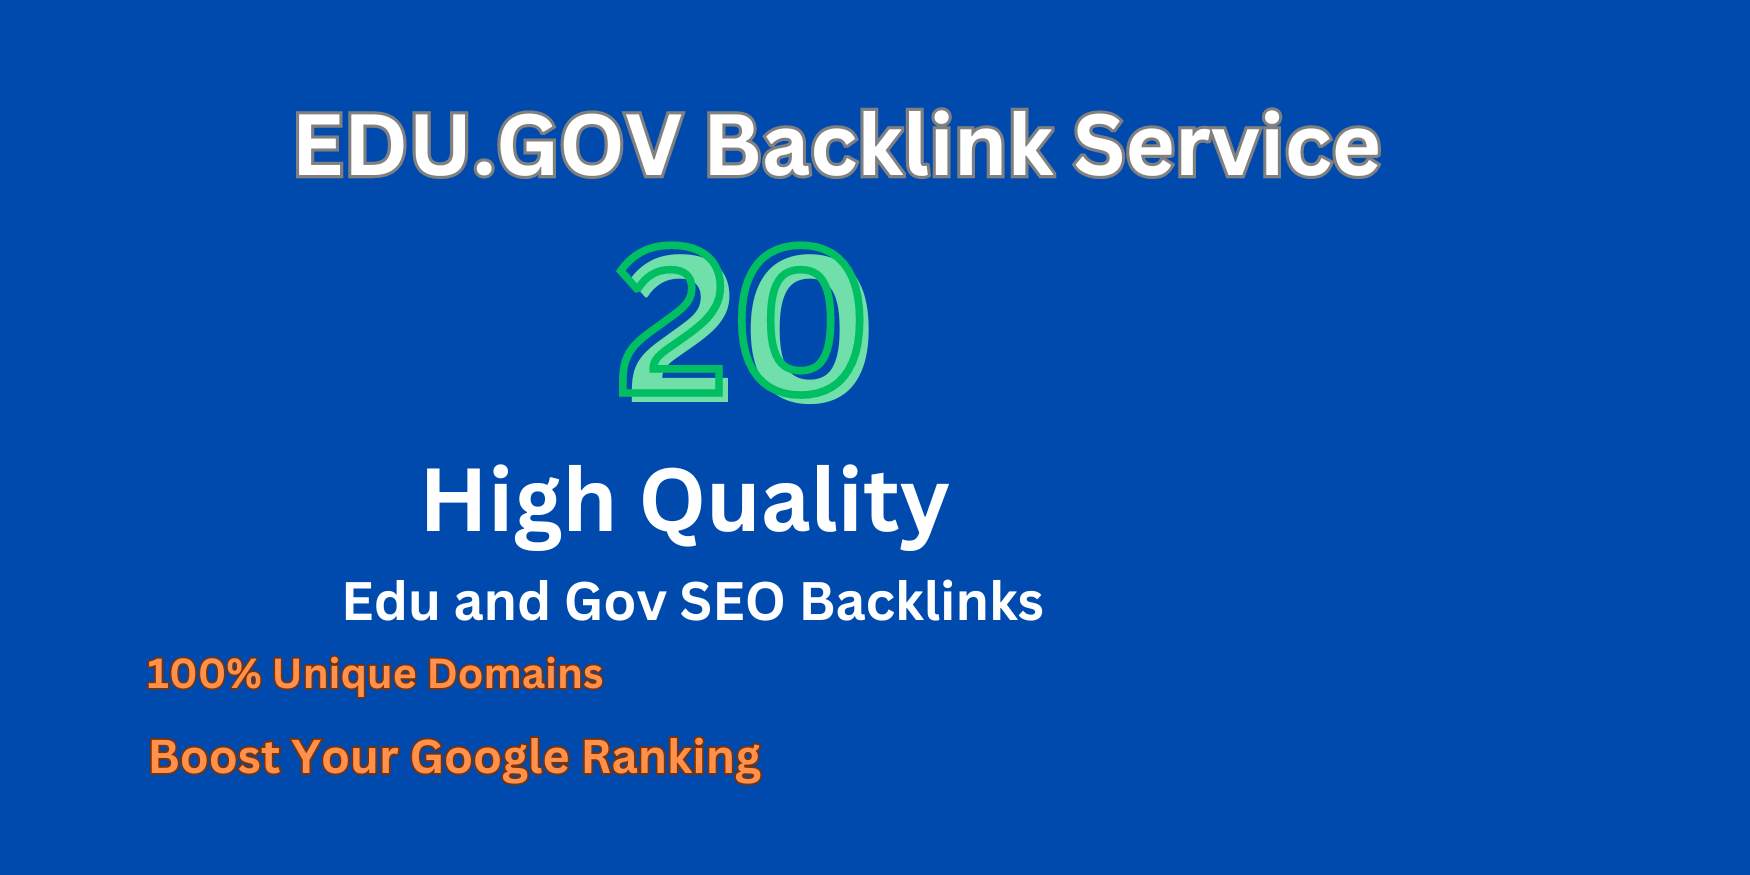 Create 20+ high-quality EDU-GOV backlinks from authoritative domains to enhance your website’s SEO and elevate its Google ranking